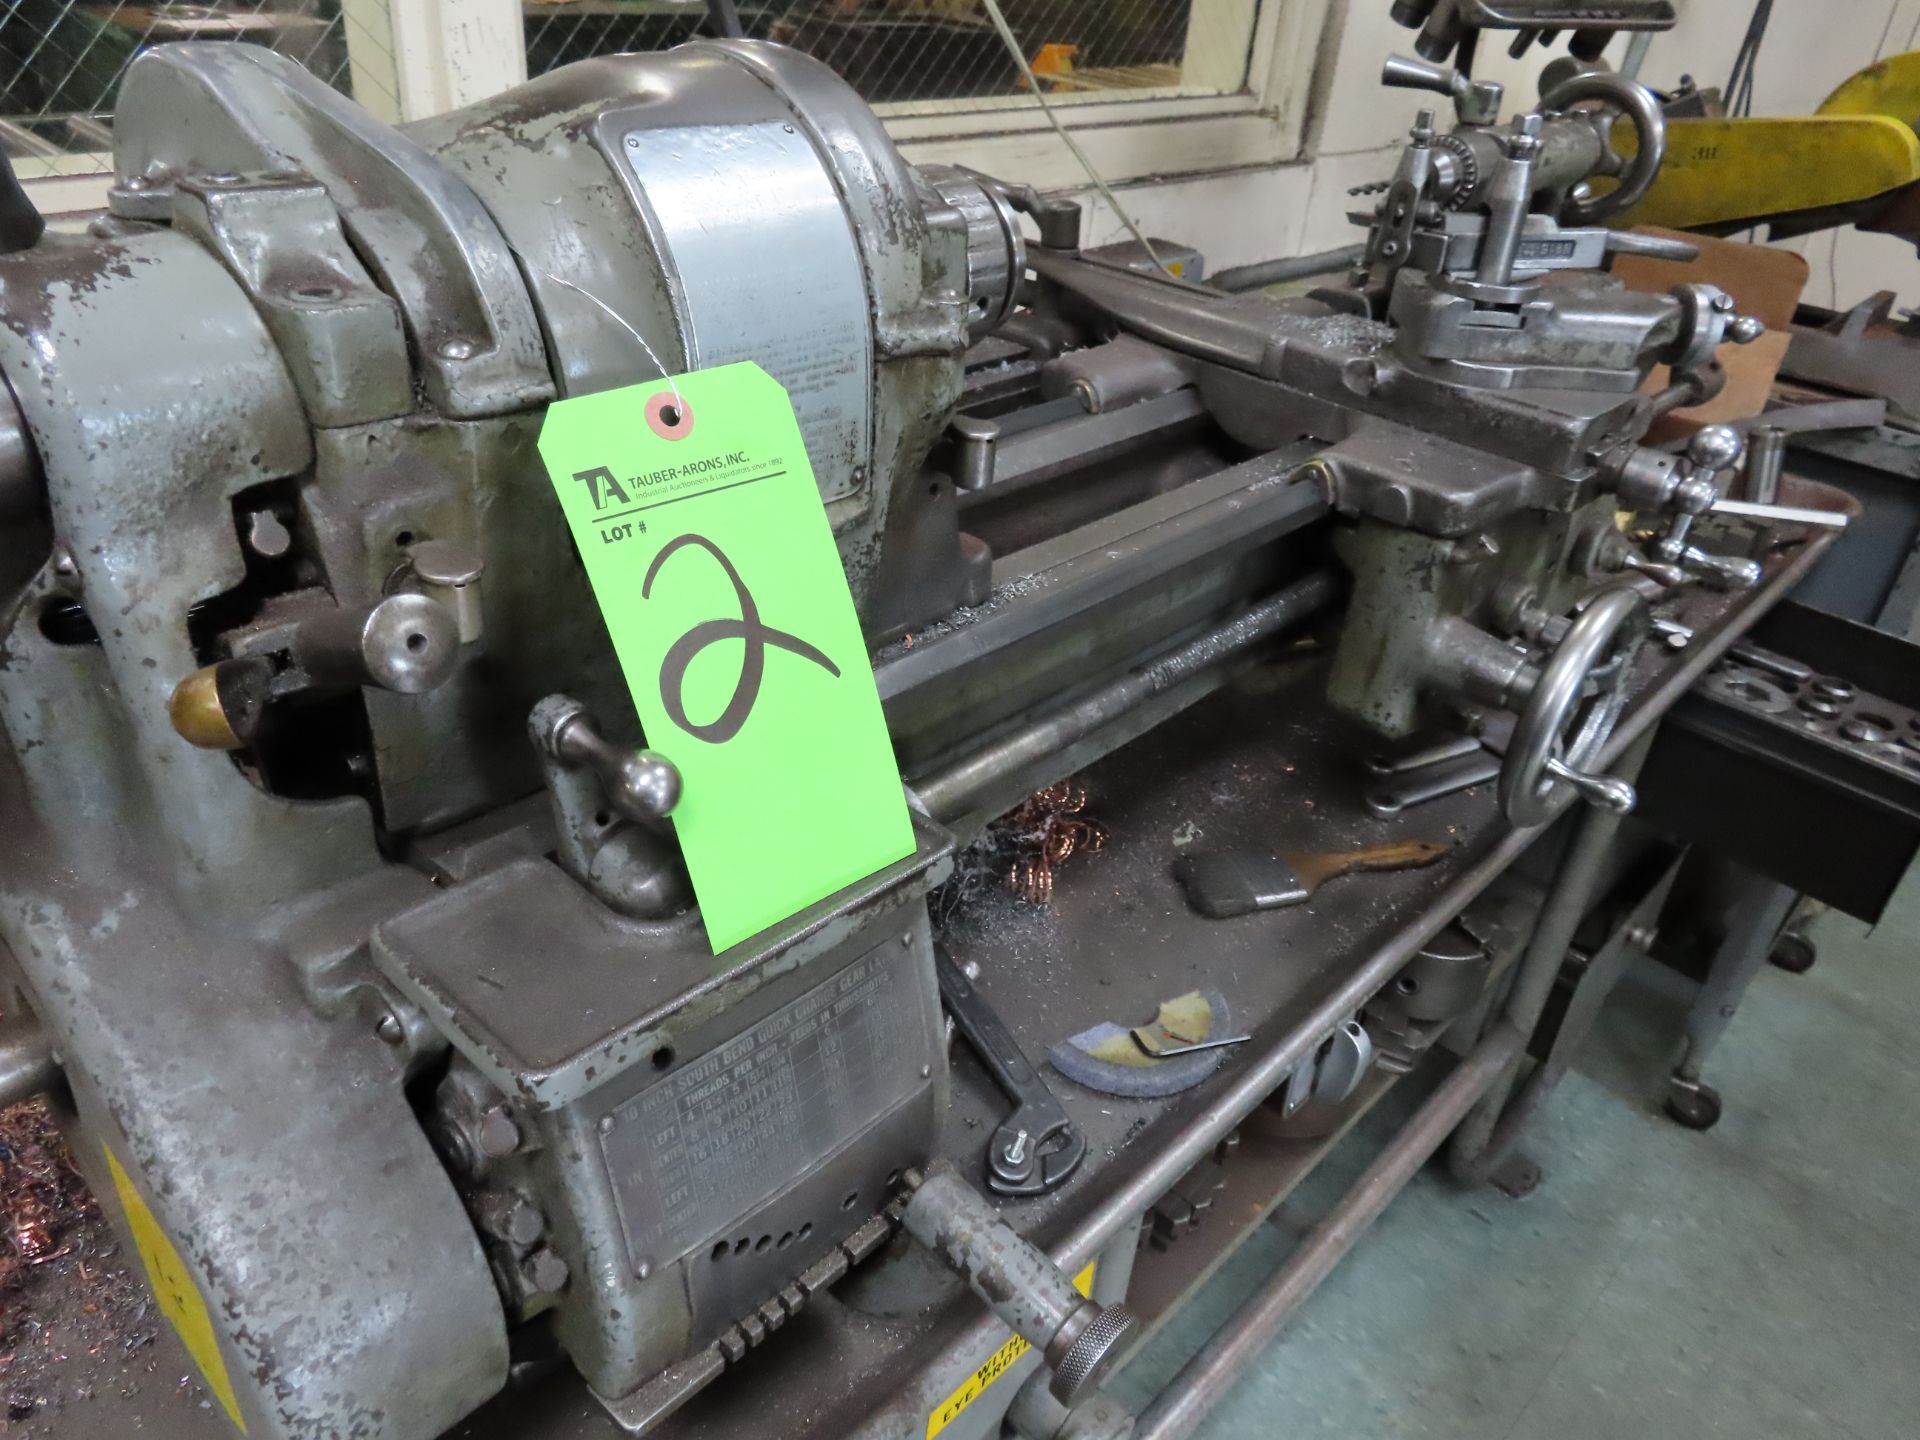 South Bend Engine Lathe w/ 3-4 Jaw Chuck, Tailstock - Image 2 of 3